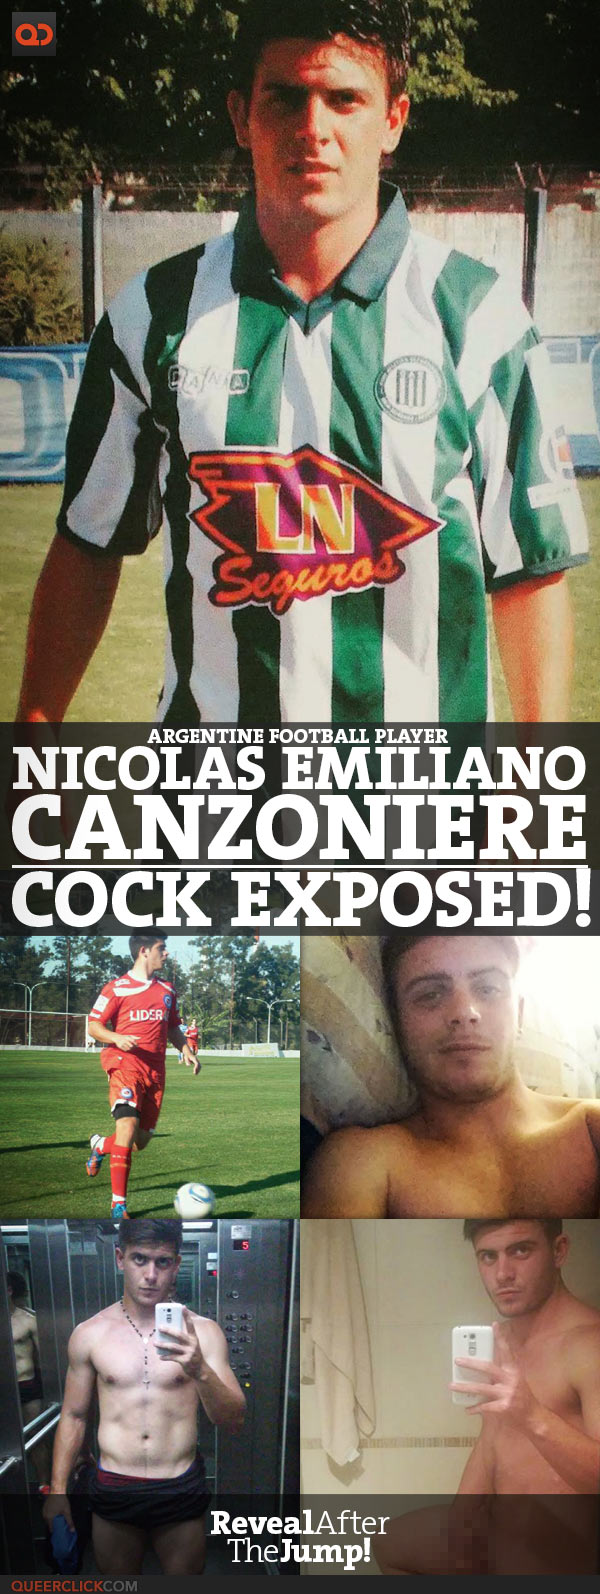 Nicolás Emiliano Canzoniere, Argentine Football Player, Cock Exposed!